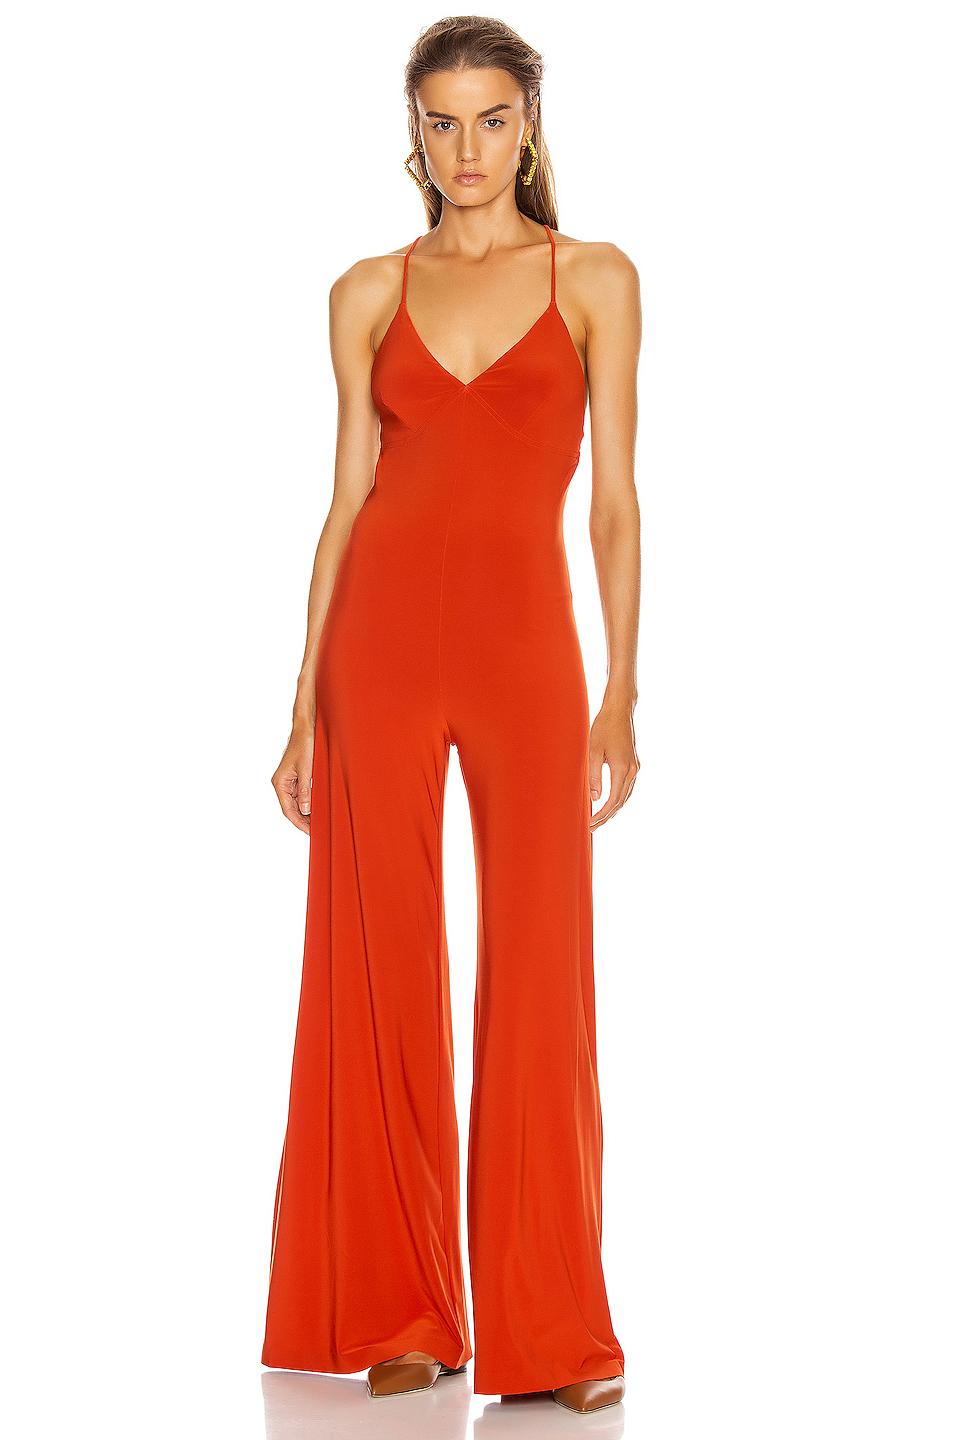 Norma Kamali Synthetic Low Back Slip Jumpsuit in Cinnamon (Red) - Lyst